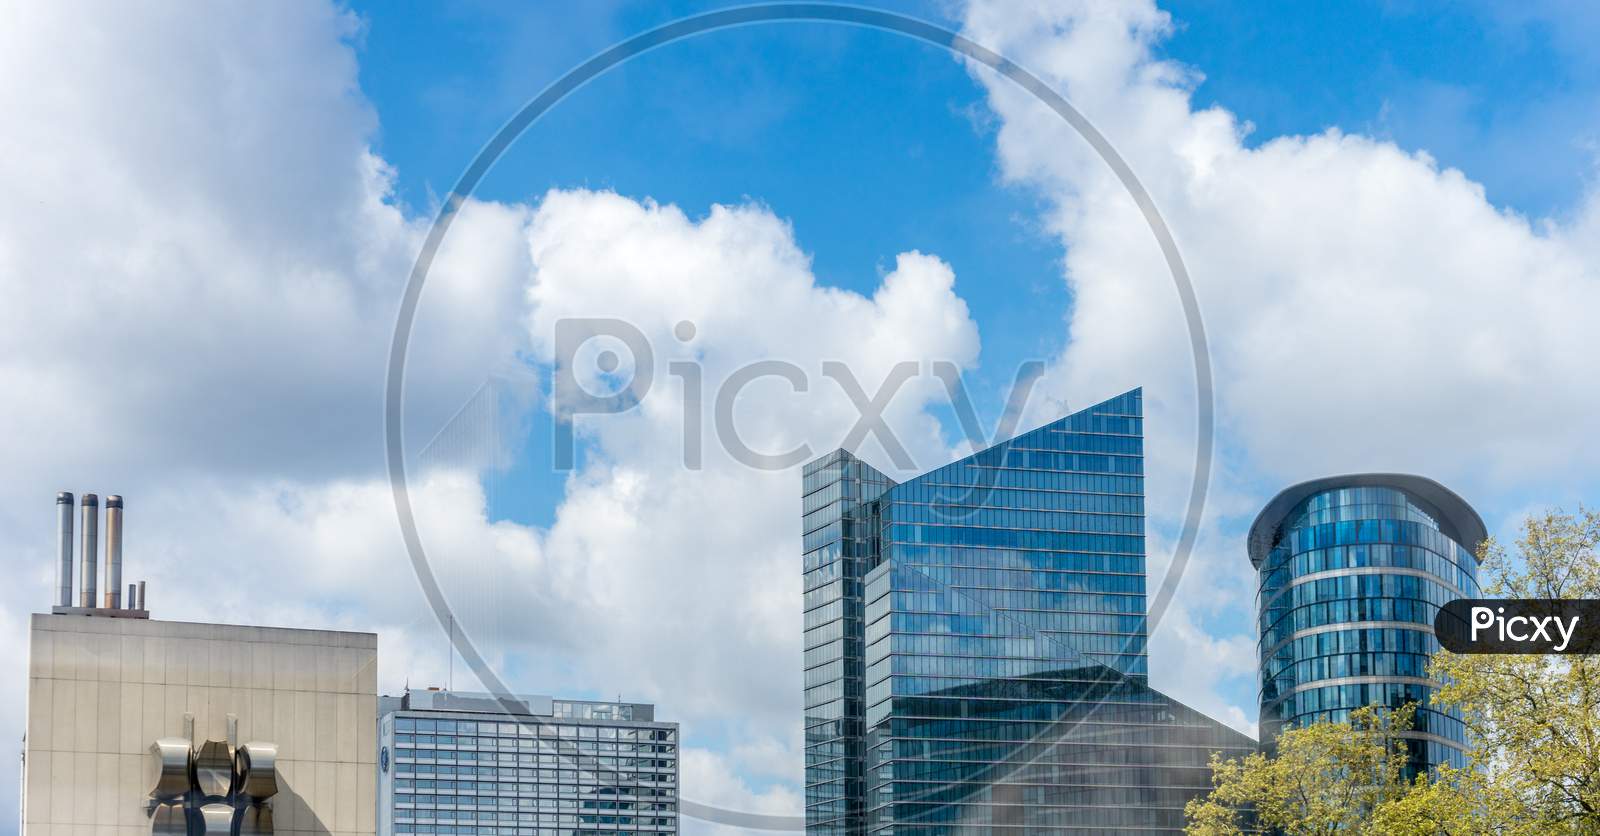 Brussels, Belgium - April 17 : The Skyline Of Brussels With Tall Buildings Relecting The Bright Light From The Sun In Brussels, Belgium On April 17, 2017